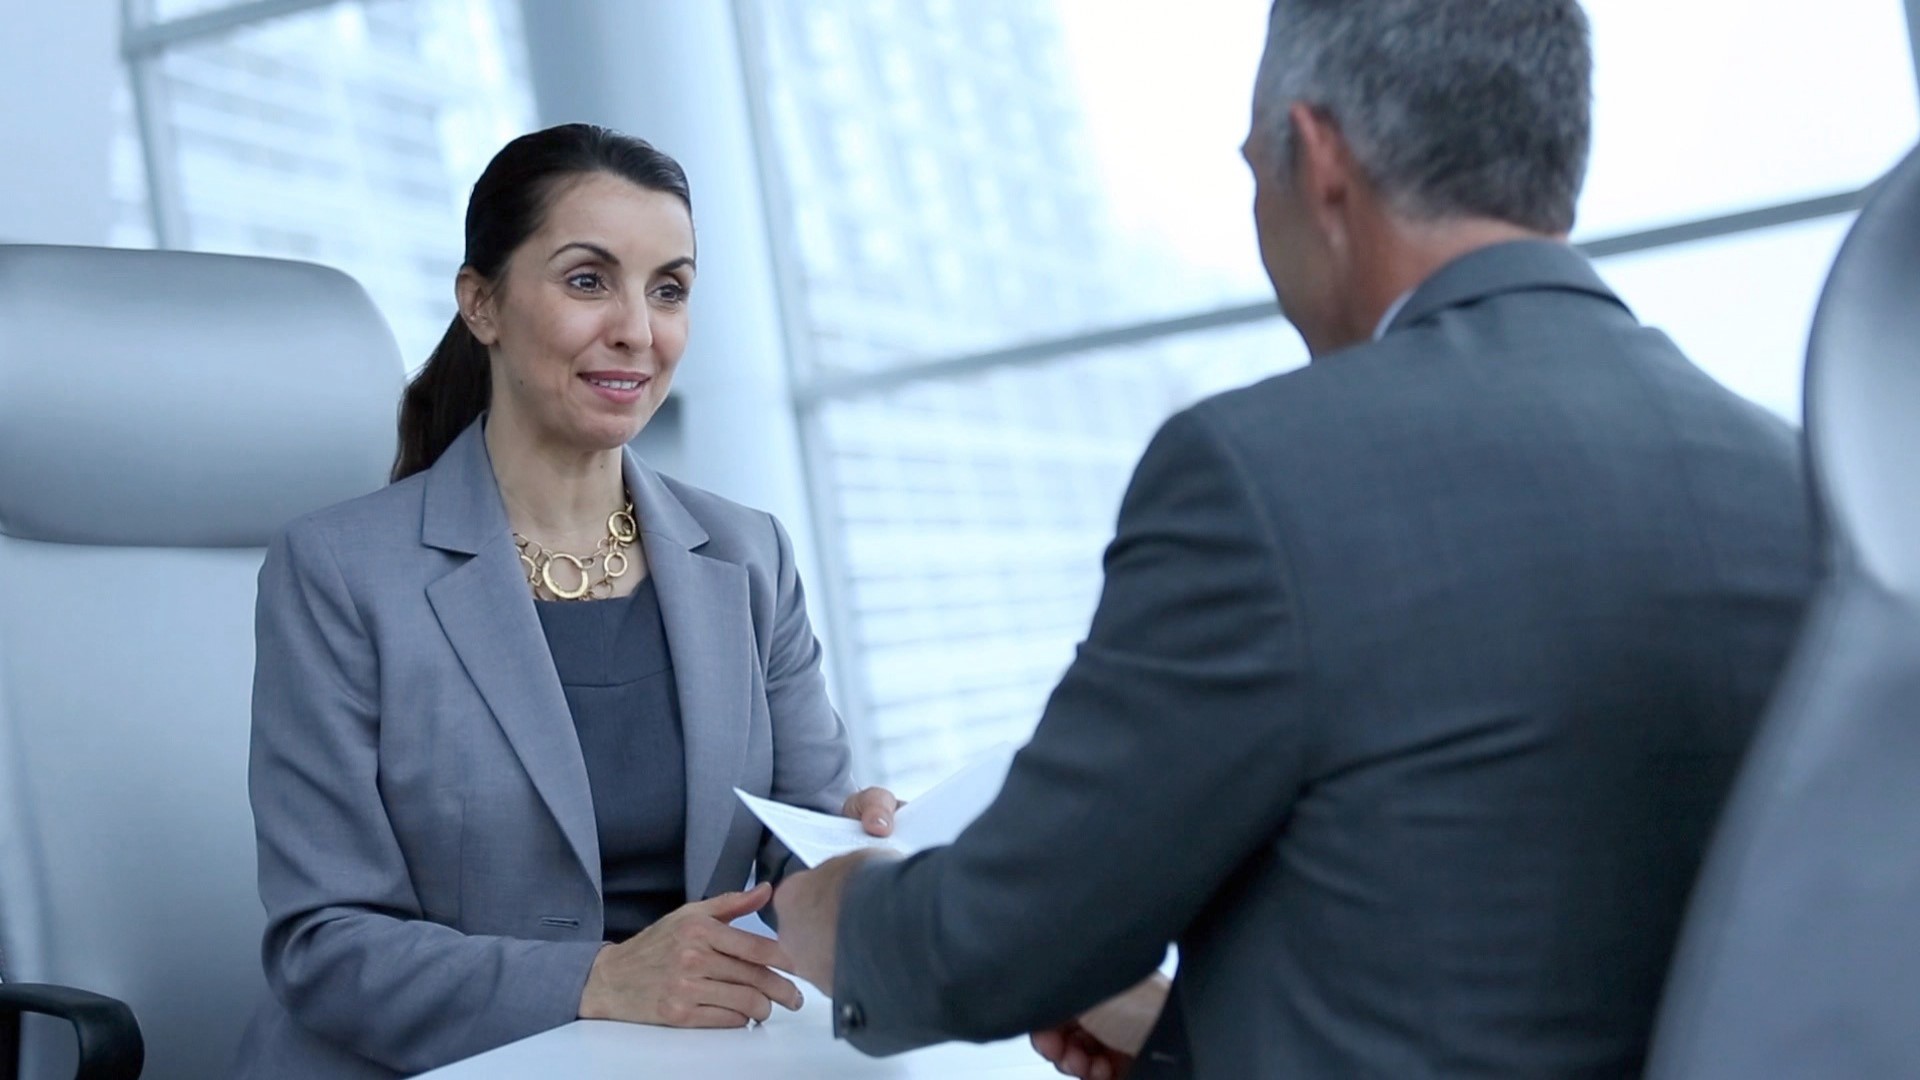 What not to say at a job interview according to the experts. Buzz60's Keri Lumm has more.